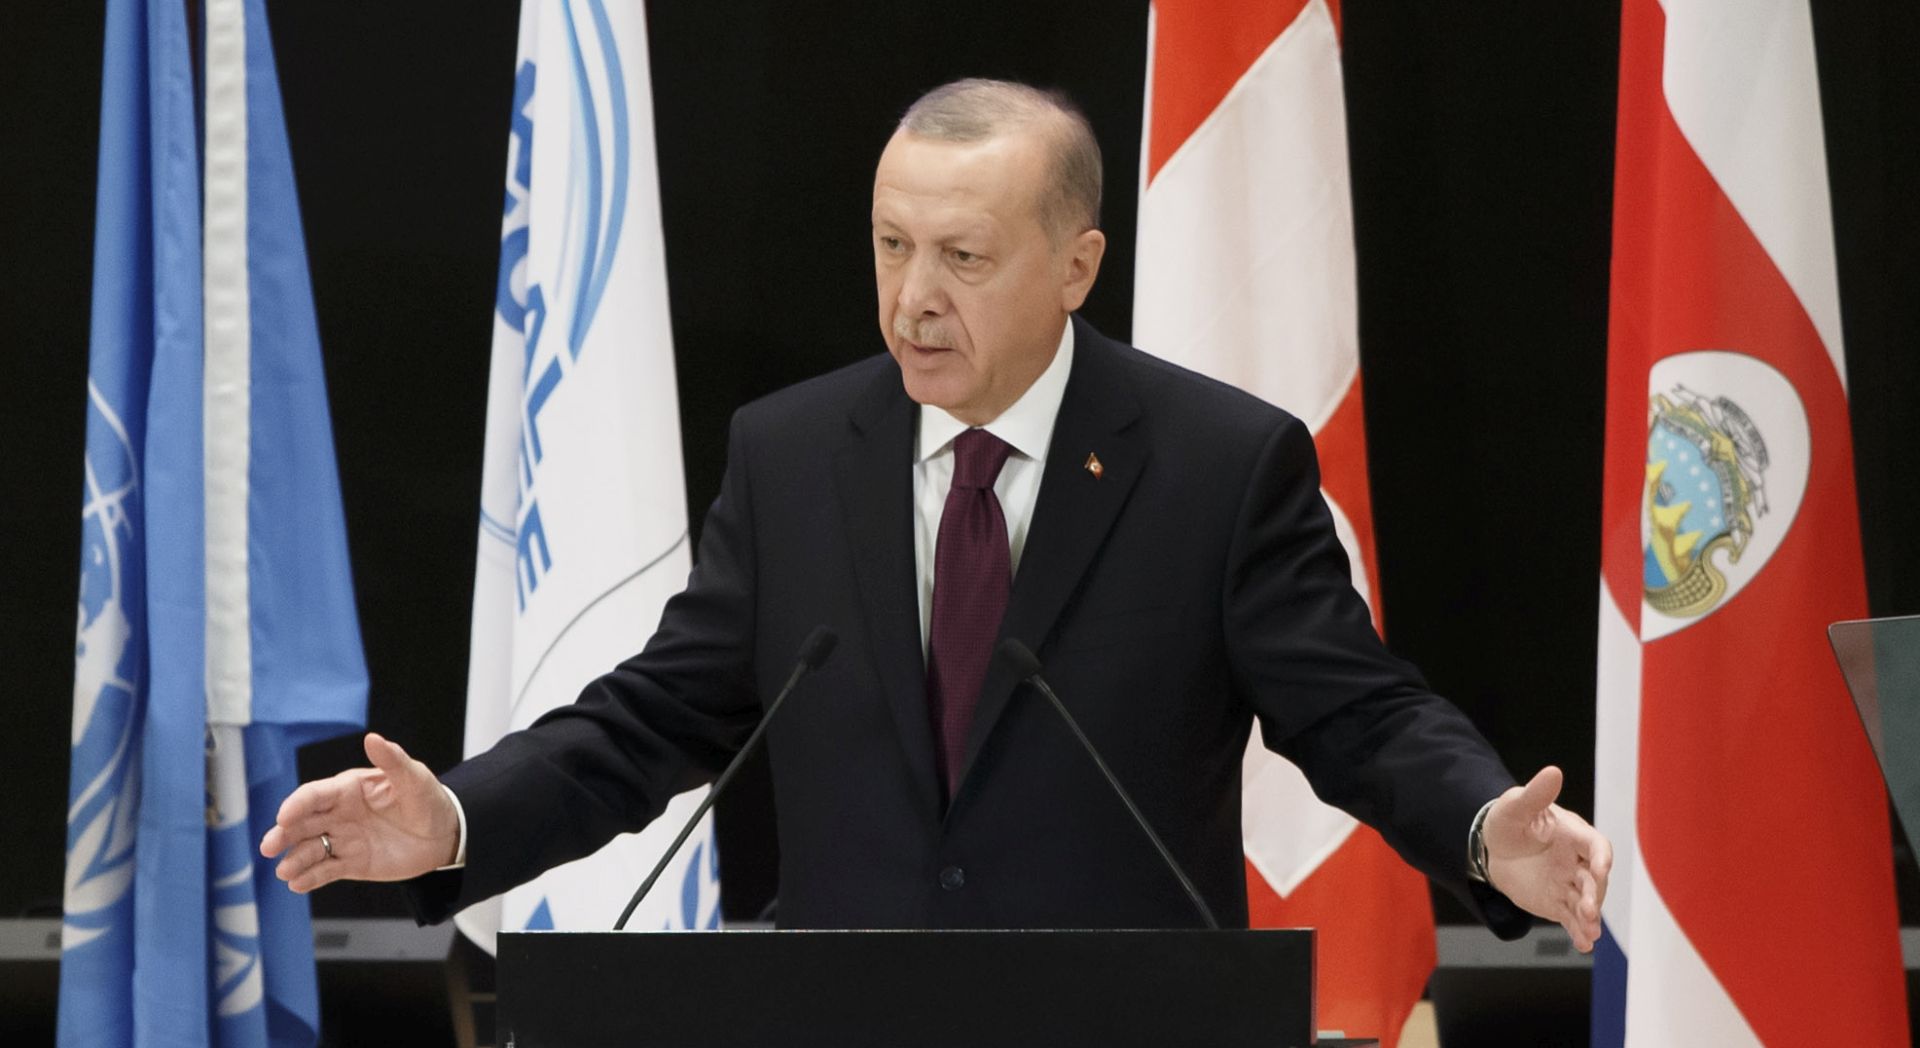 epa08076575 Turkey's President Recep Tayyip Erdogan delivers his statement during the United Nations High Commissioner for Refugees (UNHCR) Global Refugee Forum at the European headquarters of the United Nations (UNOG) in Geneva, Switzerland, 17 December 2019.  EPA/SALVATORE DI NOLFI